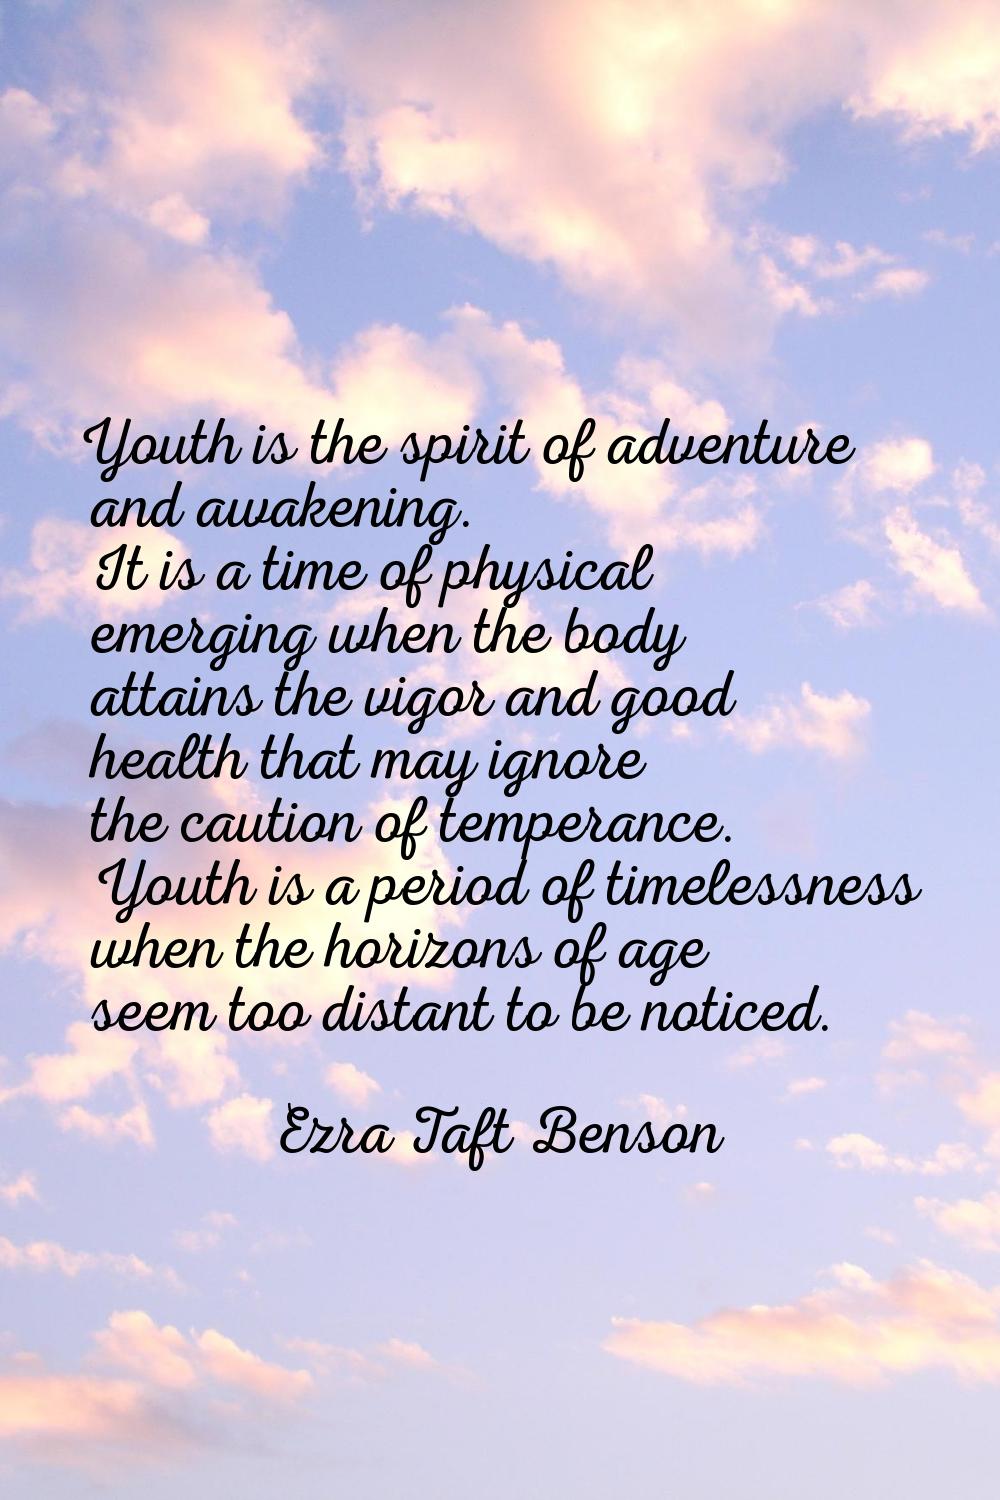 Youth is the spirit of adventure and awakening. It is a time of physical emerging when the body att